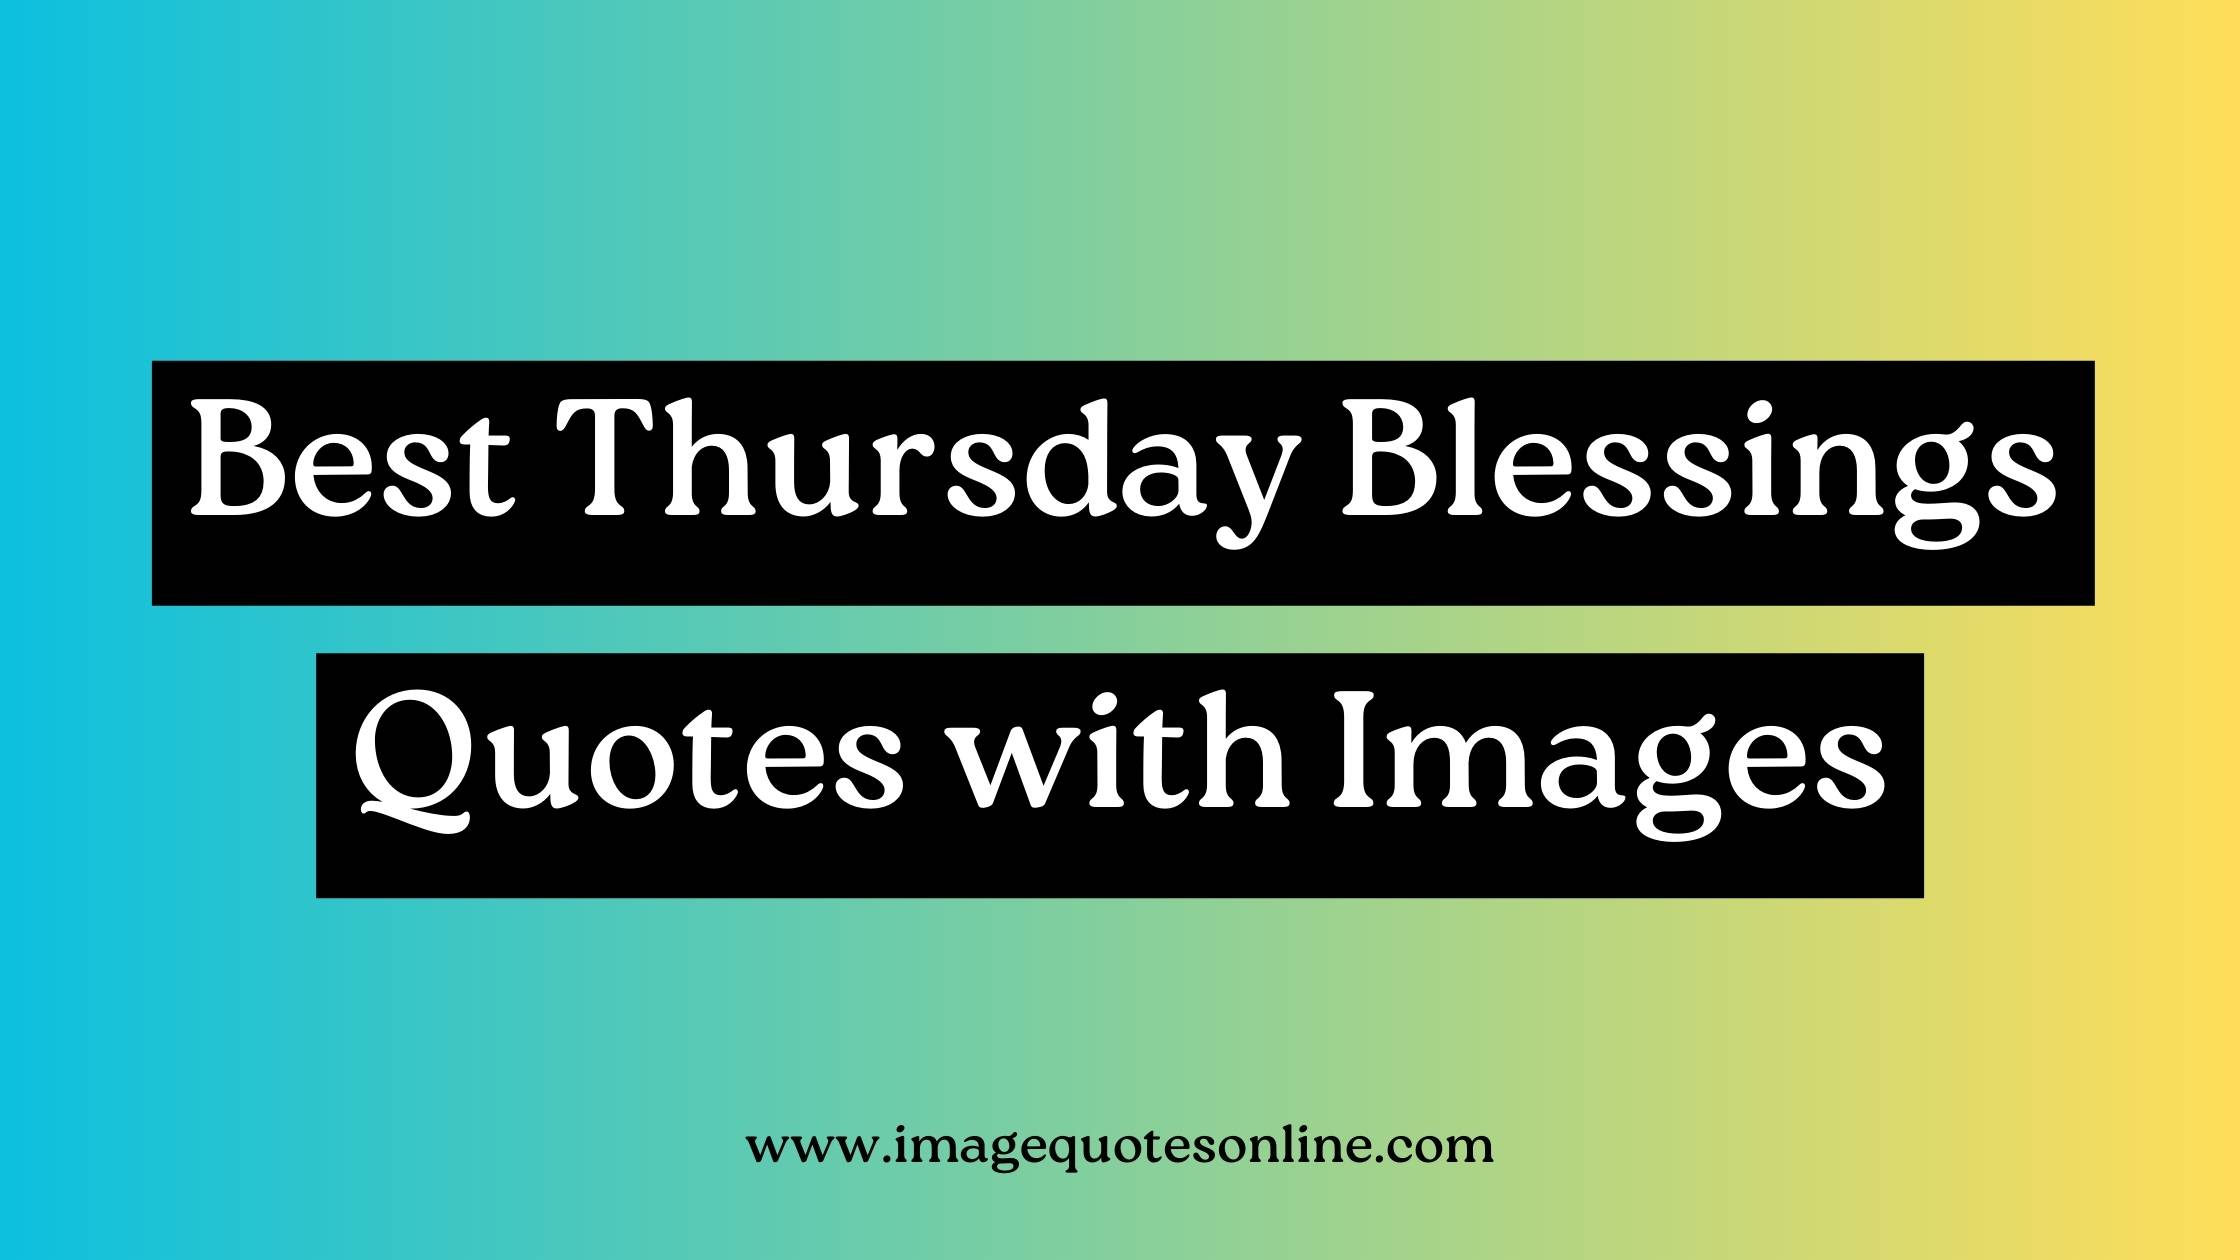 thursday blessings images and quotes